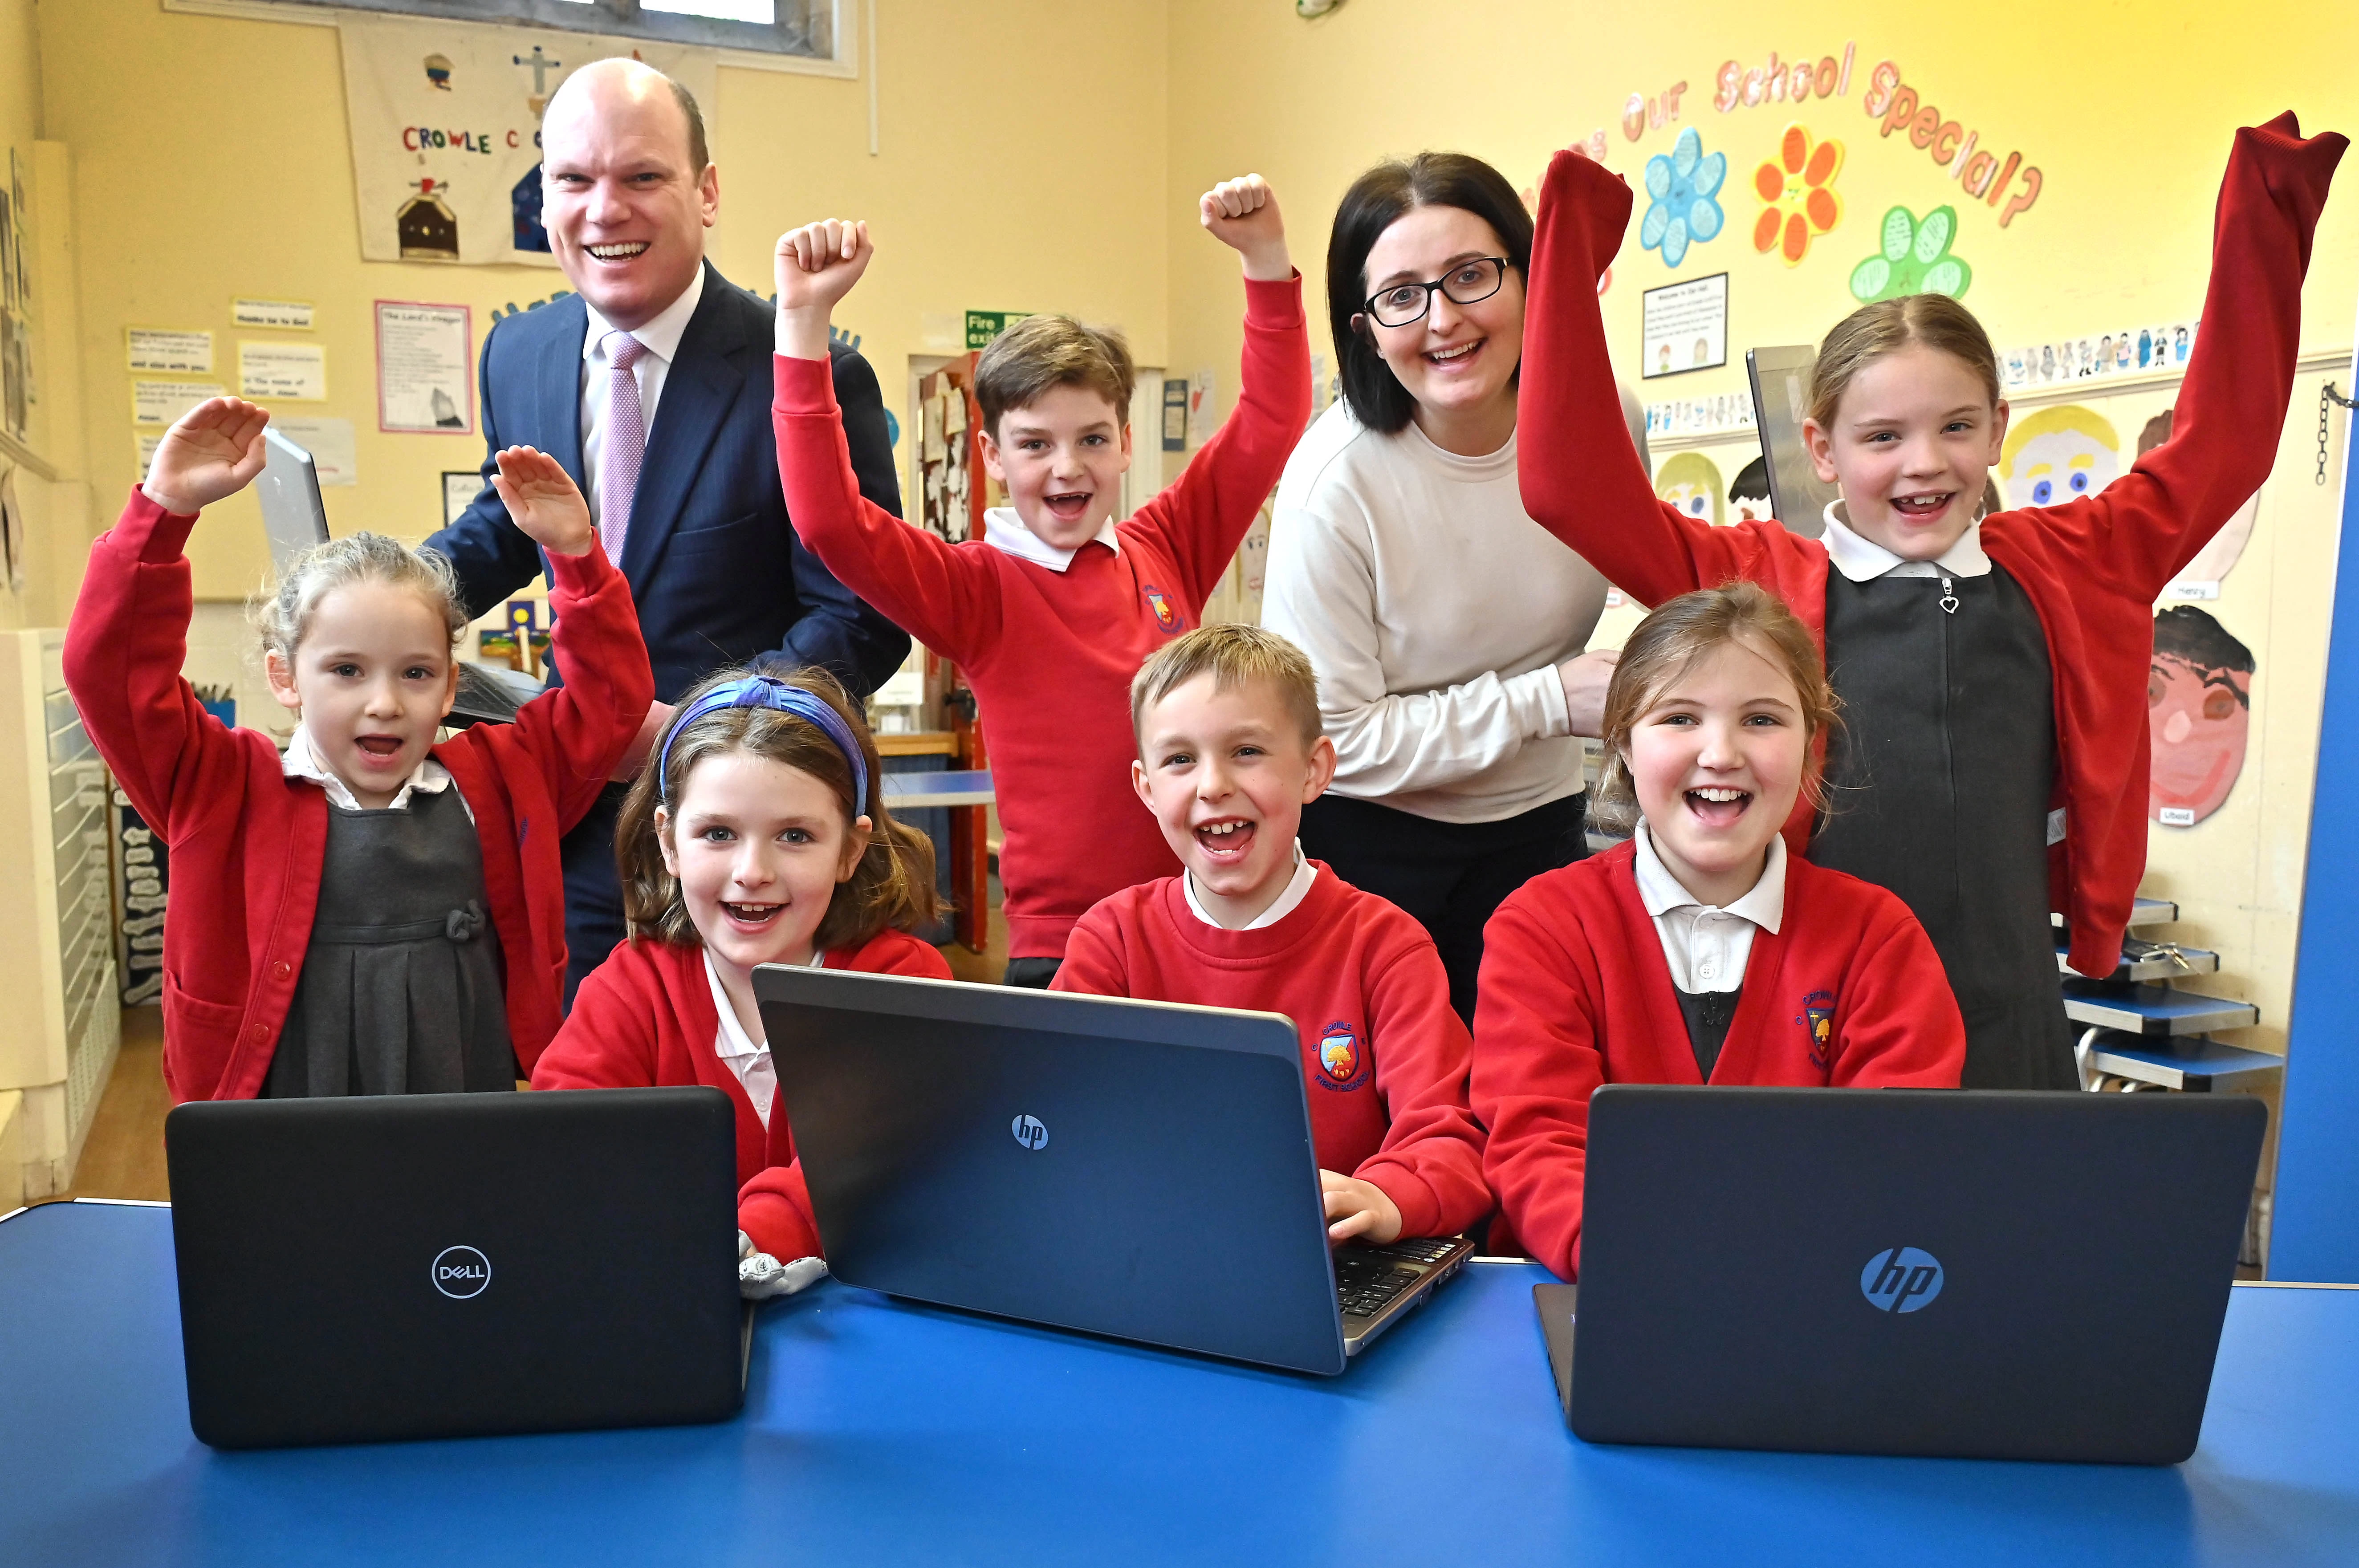 Stoford donates funding for laptops for Crowle C of E First School, Worcestershire